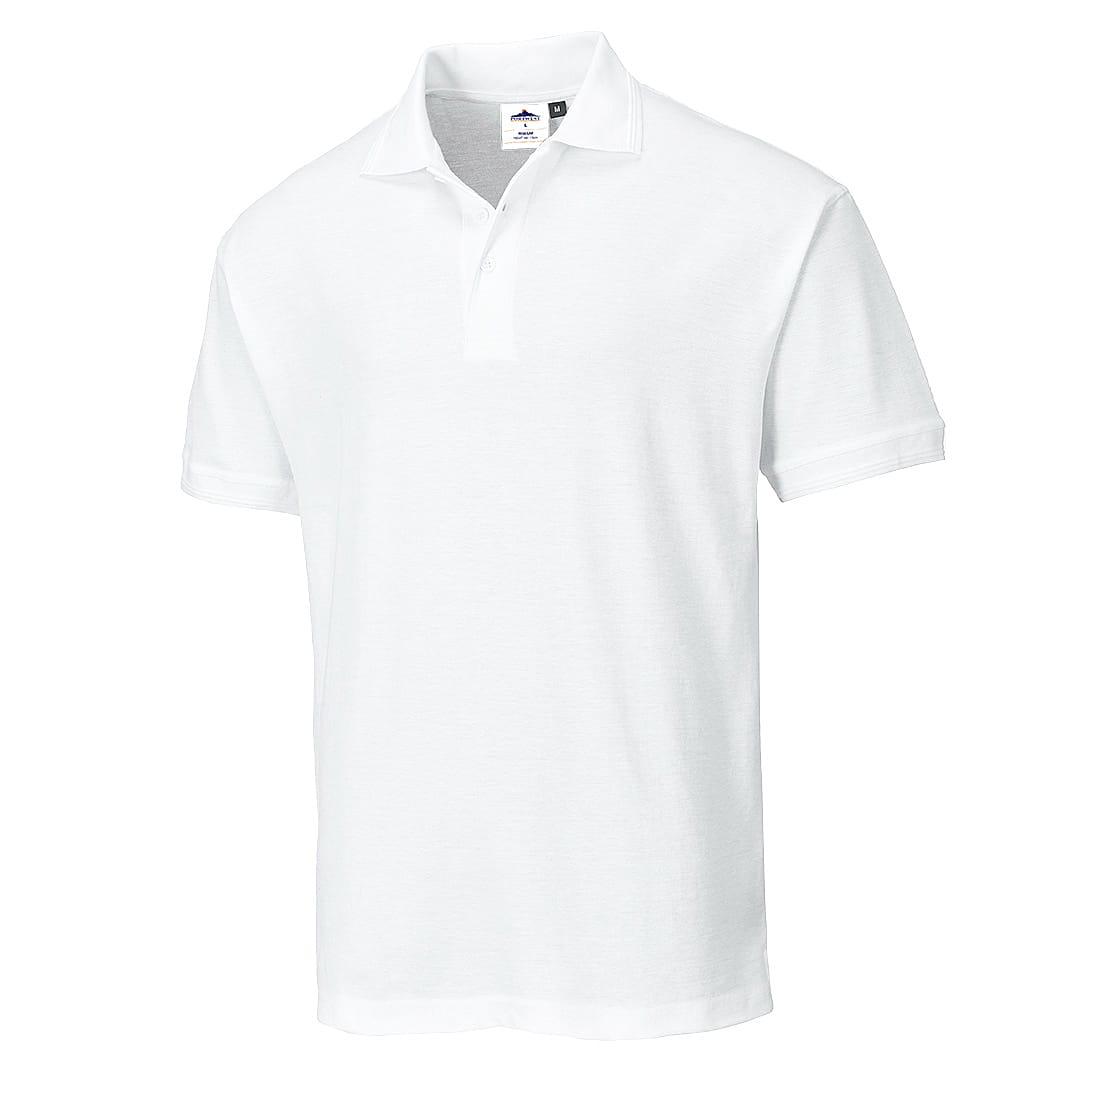 Portwest Verona Cotton Polo Shirt in White (Product Code: B220)